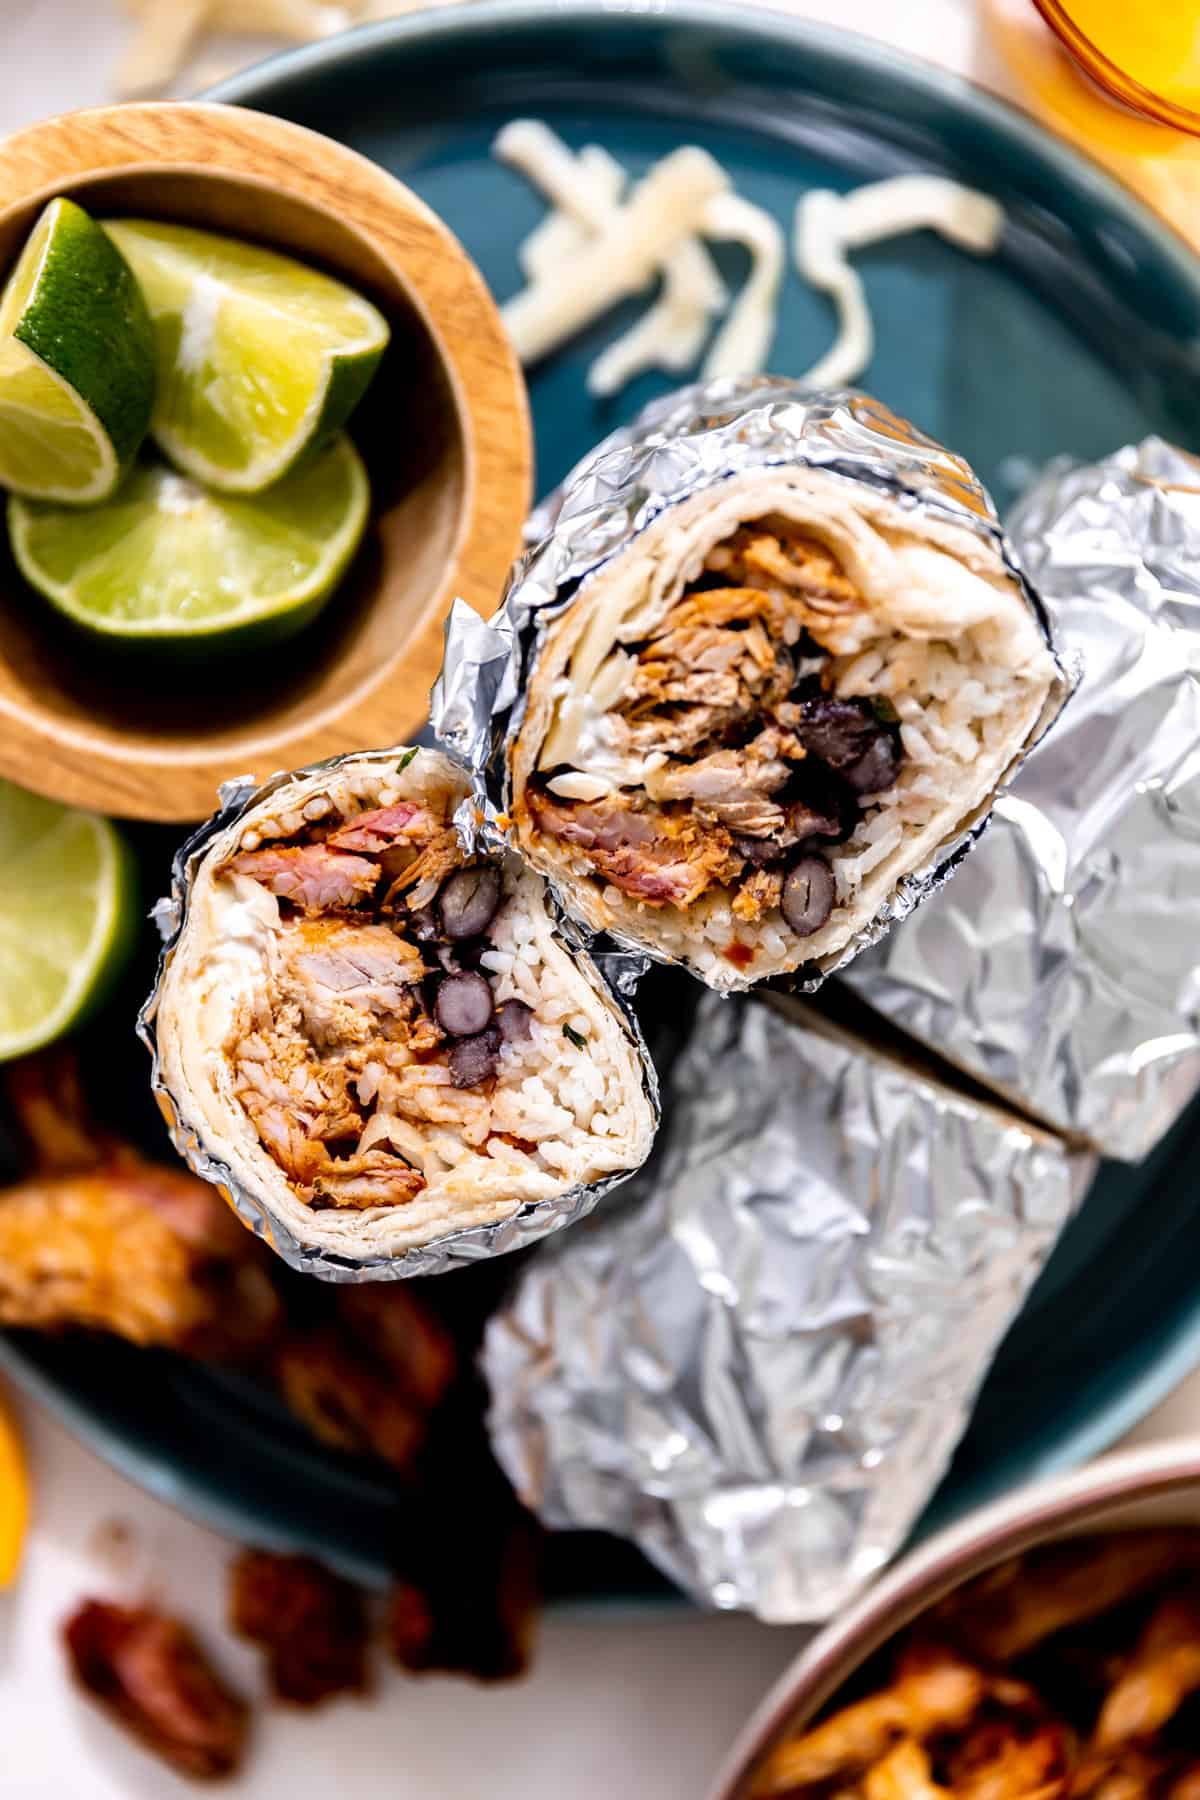 Plate with rolled carnitas burritos wrapped in foil and sliced in half, two ends placed up to show the fillings.